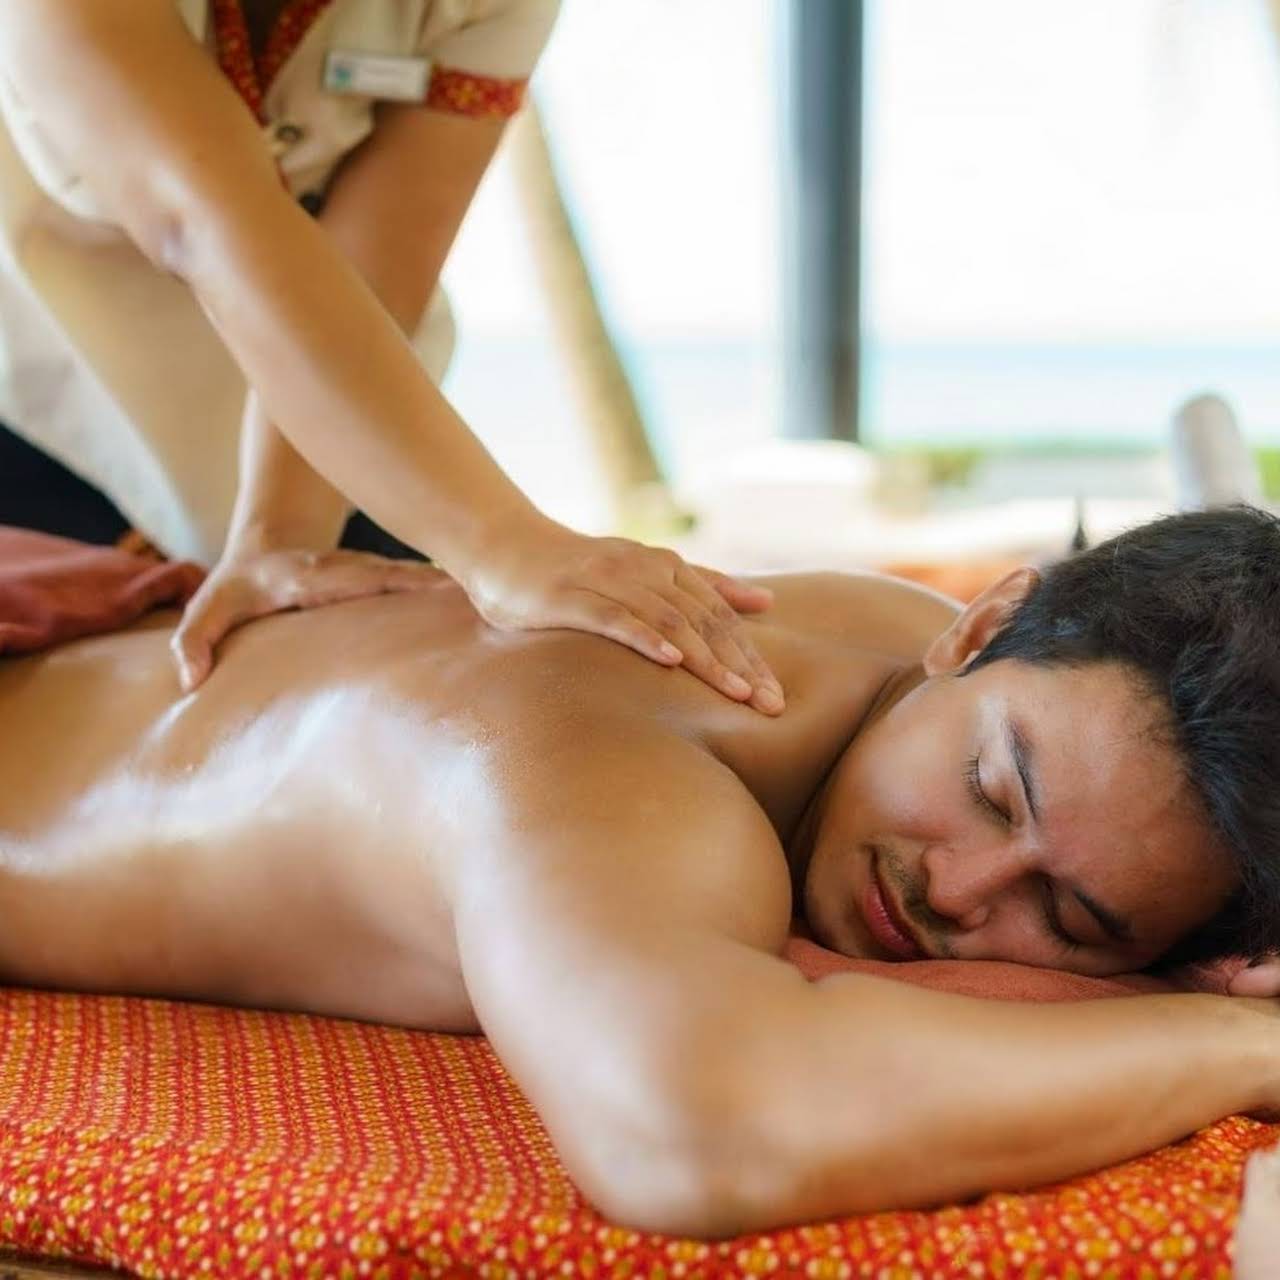 Massage by Top Models Mayor Vatika 7568798332,Jaipur,Services,Free Classifieds,Post Free Ads,77traders.com